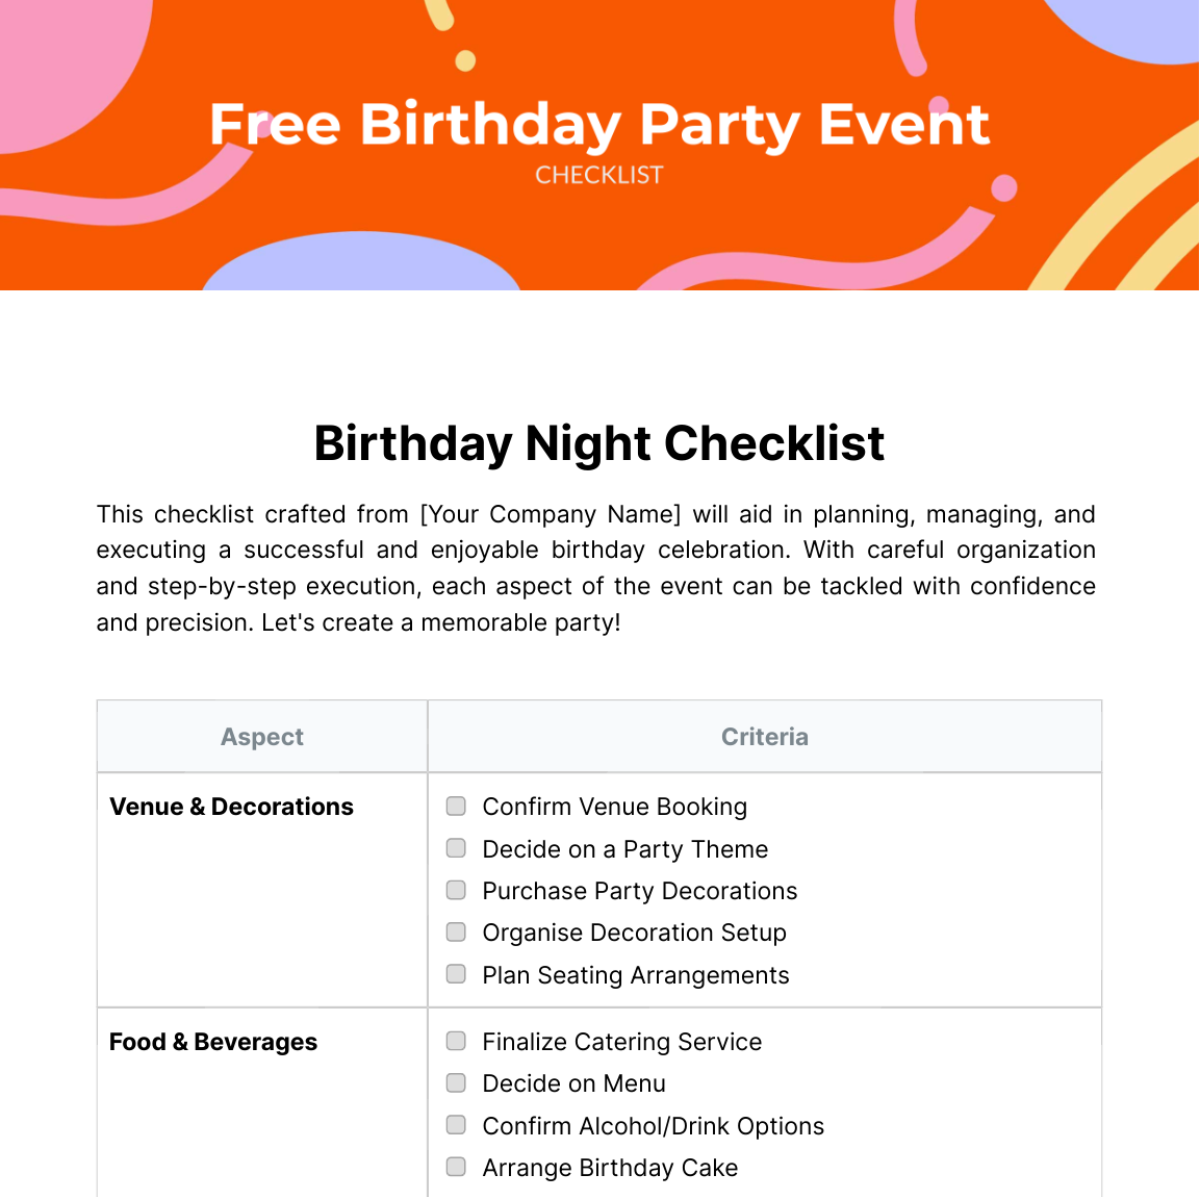 Free Birthday Party Event Checklist Template